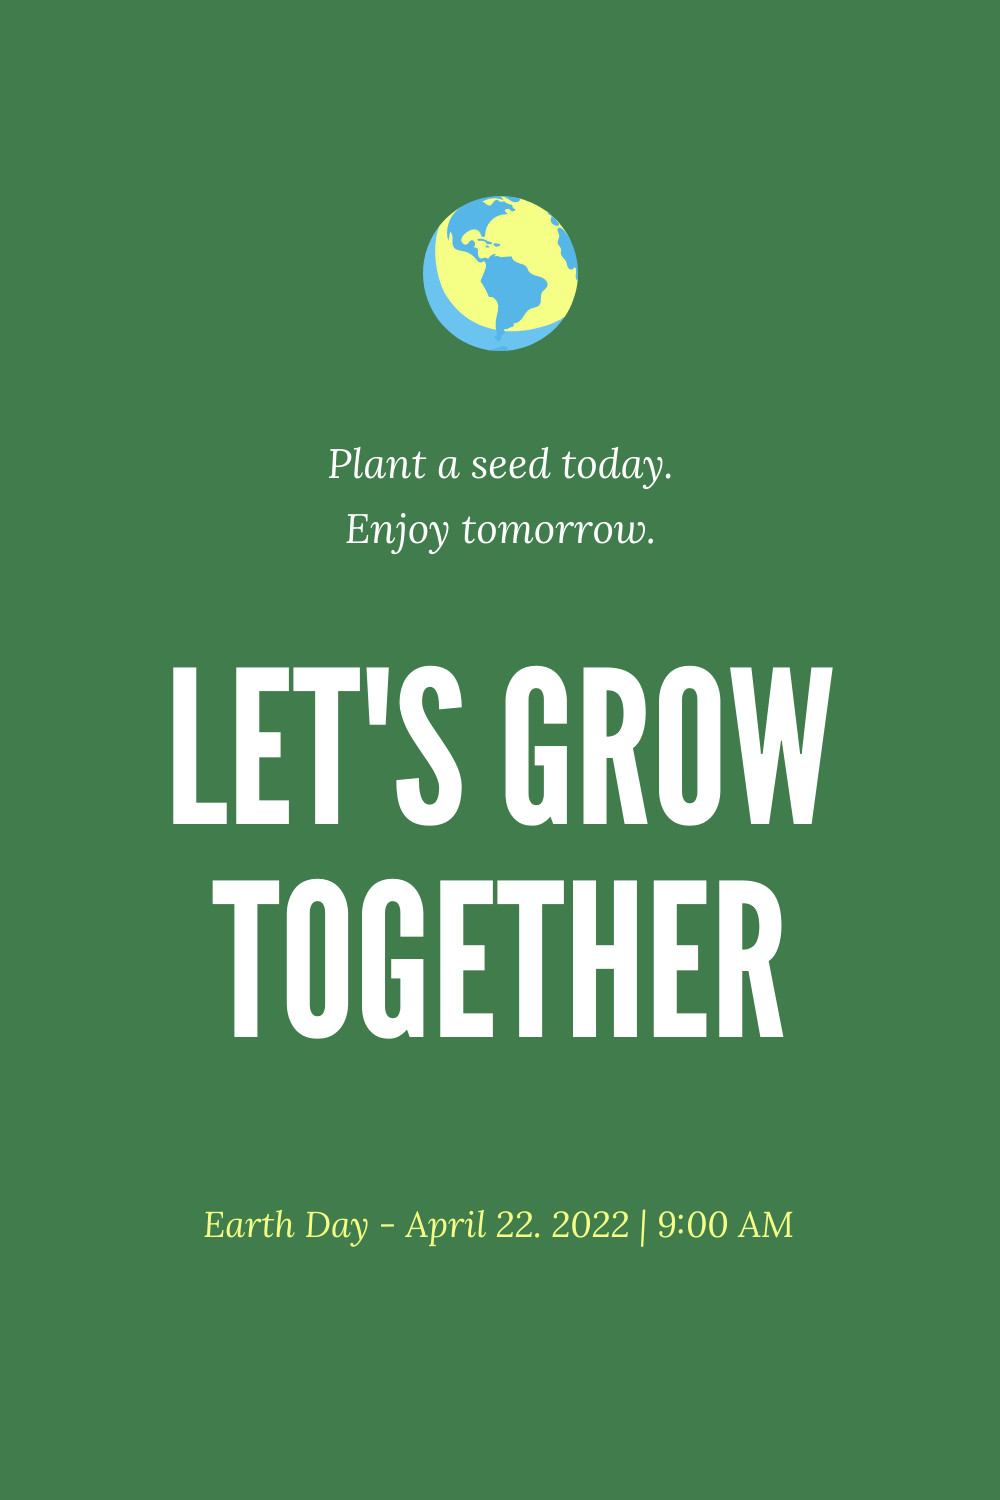 Grow together Earth Day Facebook Cover 820x360